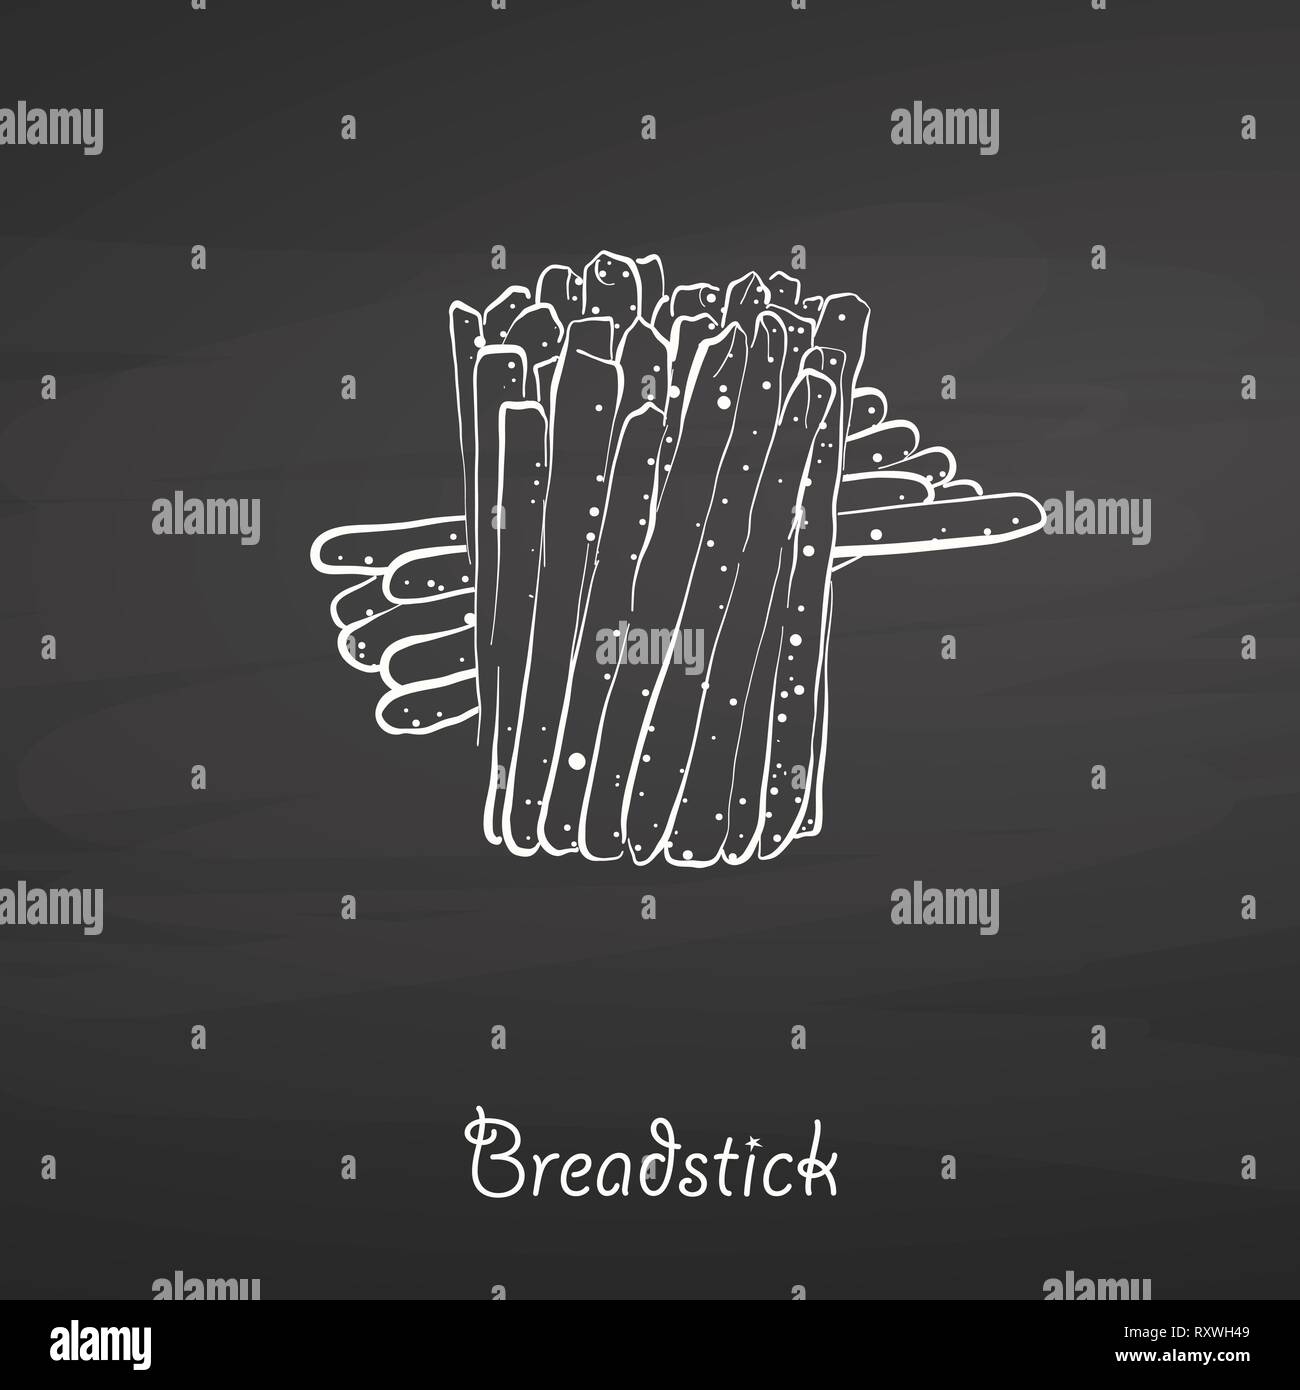 Breadstick food sketch on chalkboard. Vector drawing of Dry bread, usually known in Italy. Food illustration series. Stock Vector